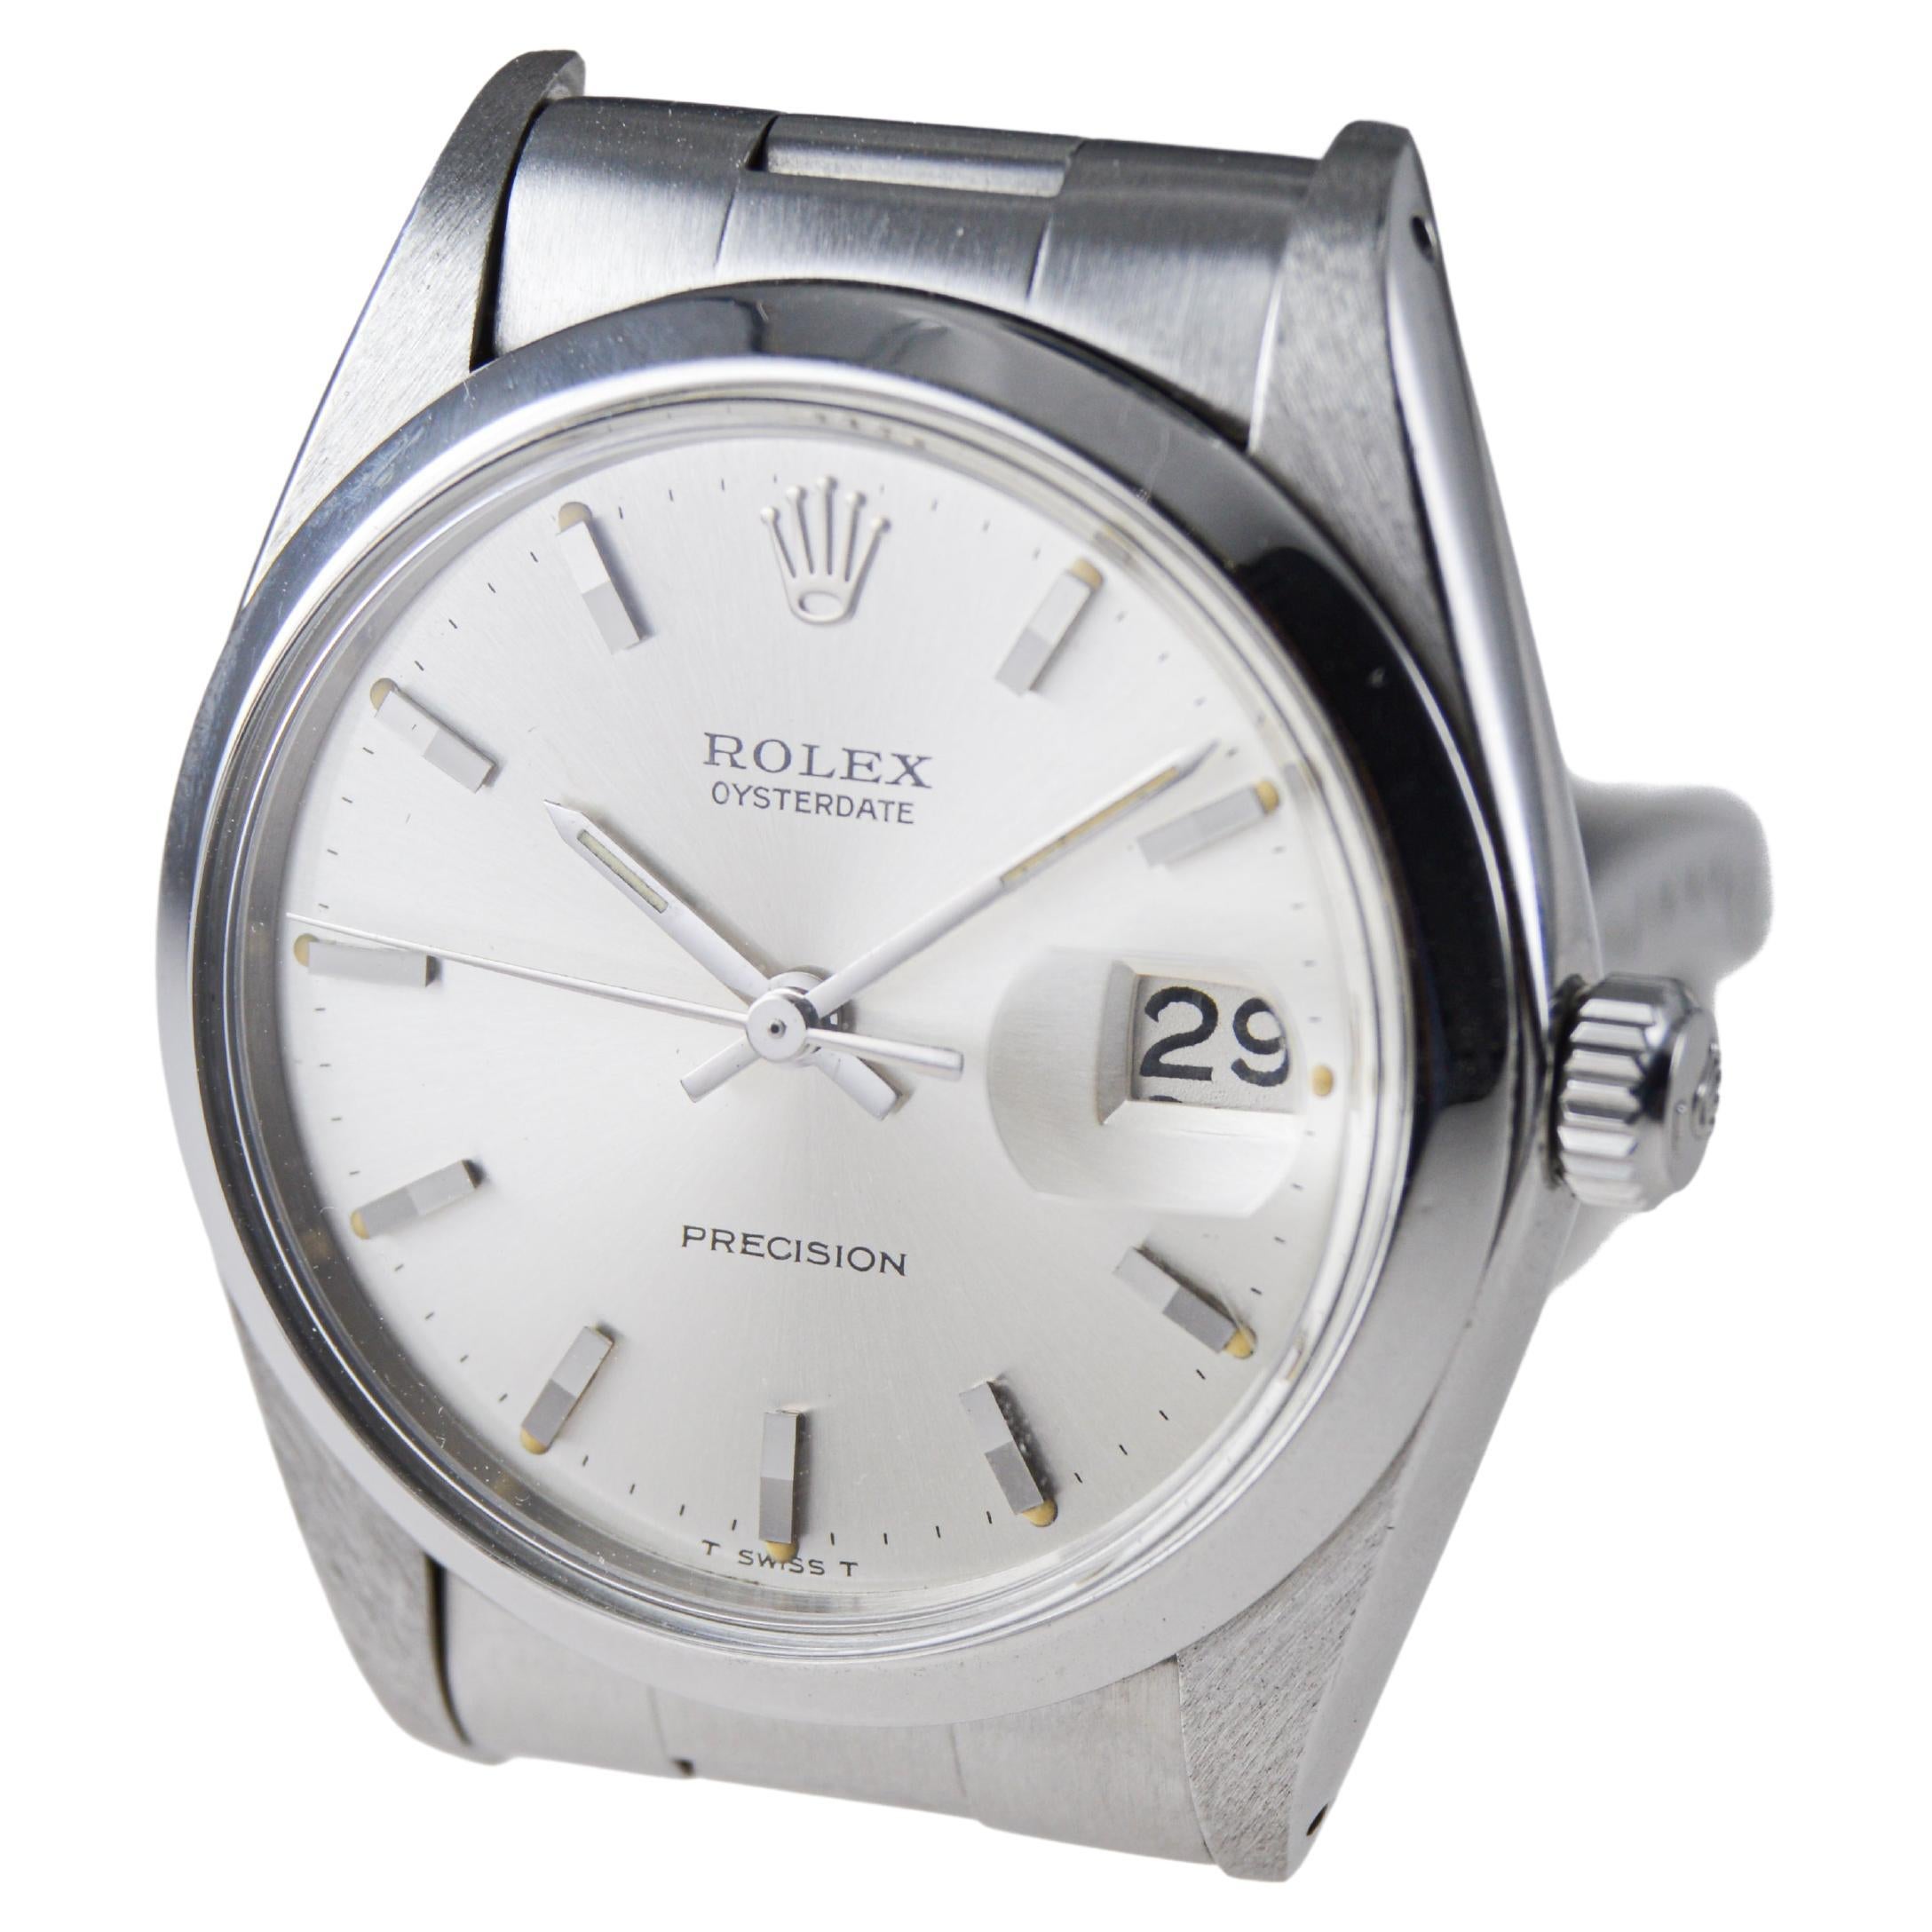 Rolex Stainless Steel Oysterdate with Factory Original Silver Dial circa, 1967 For Sale 1